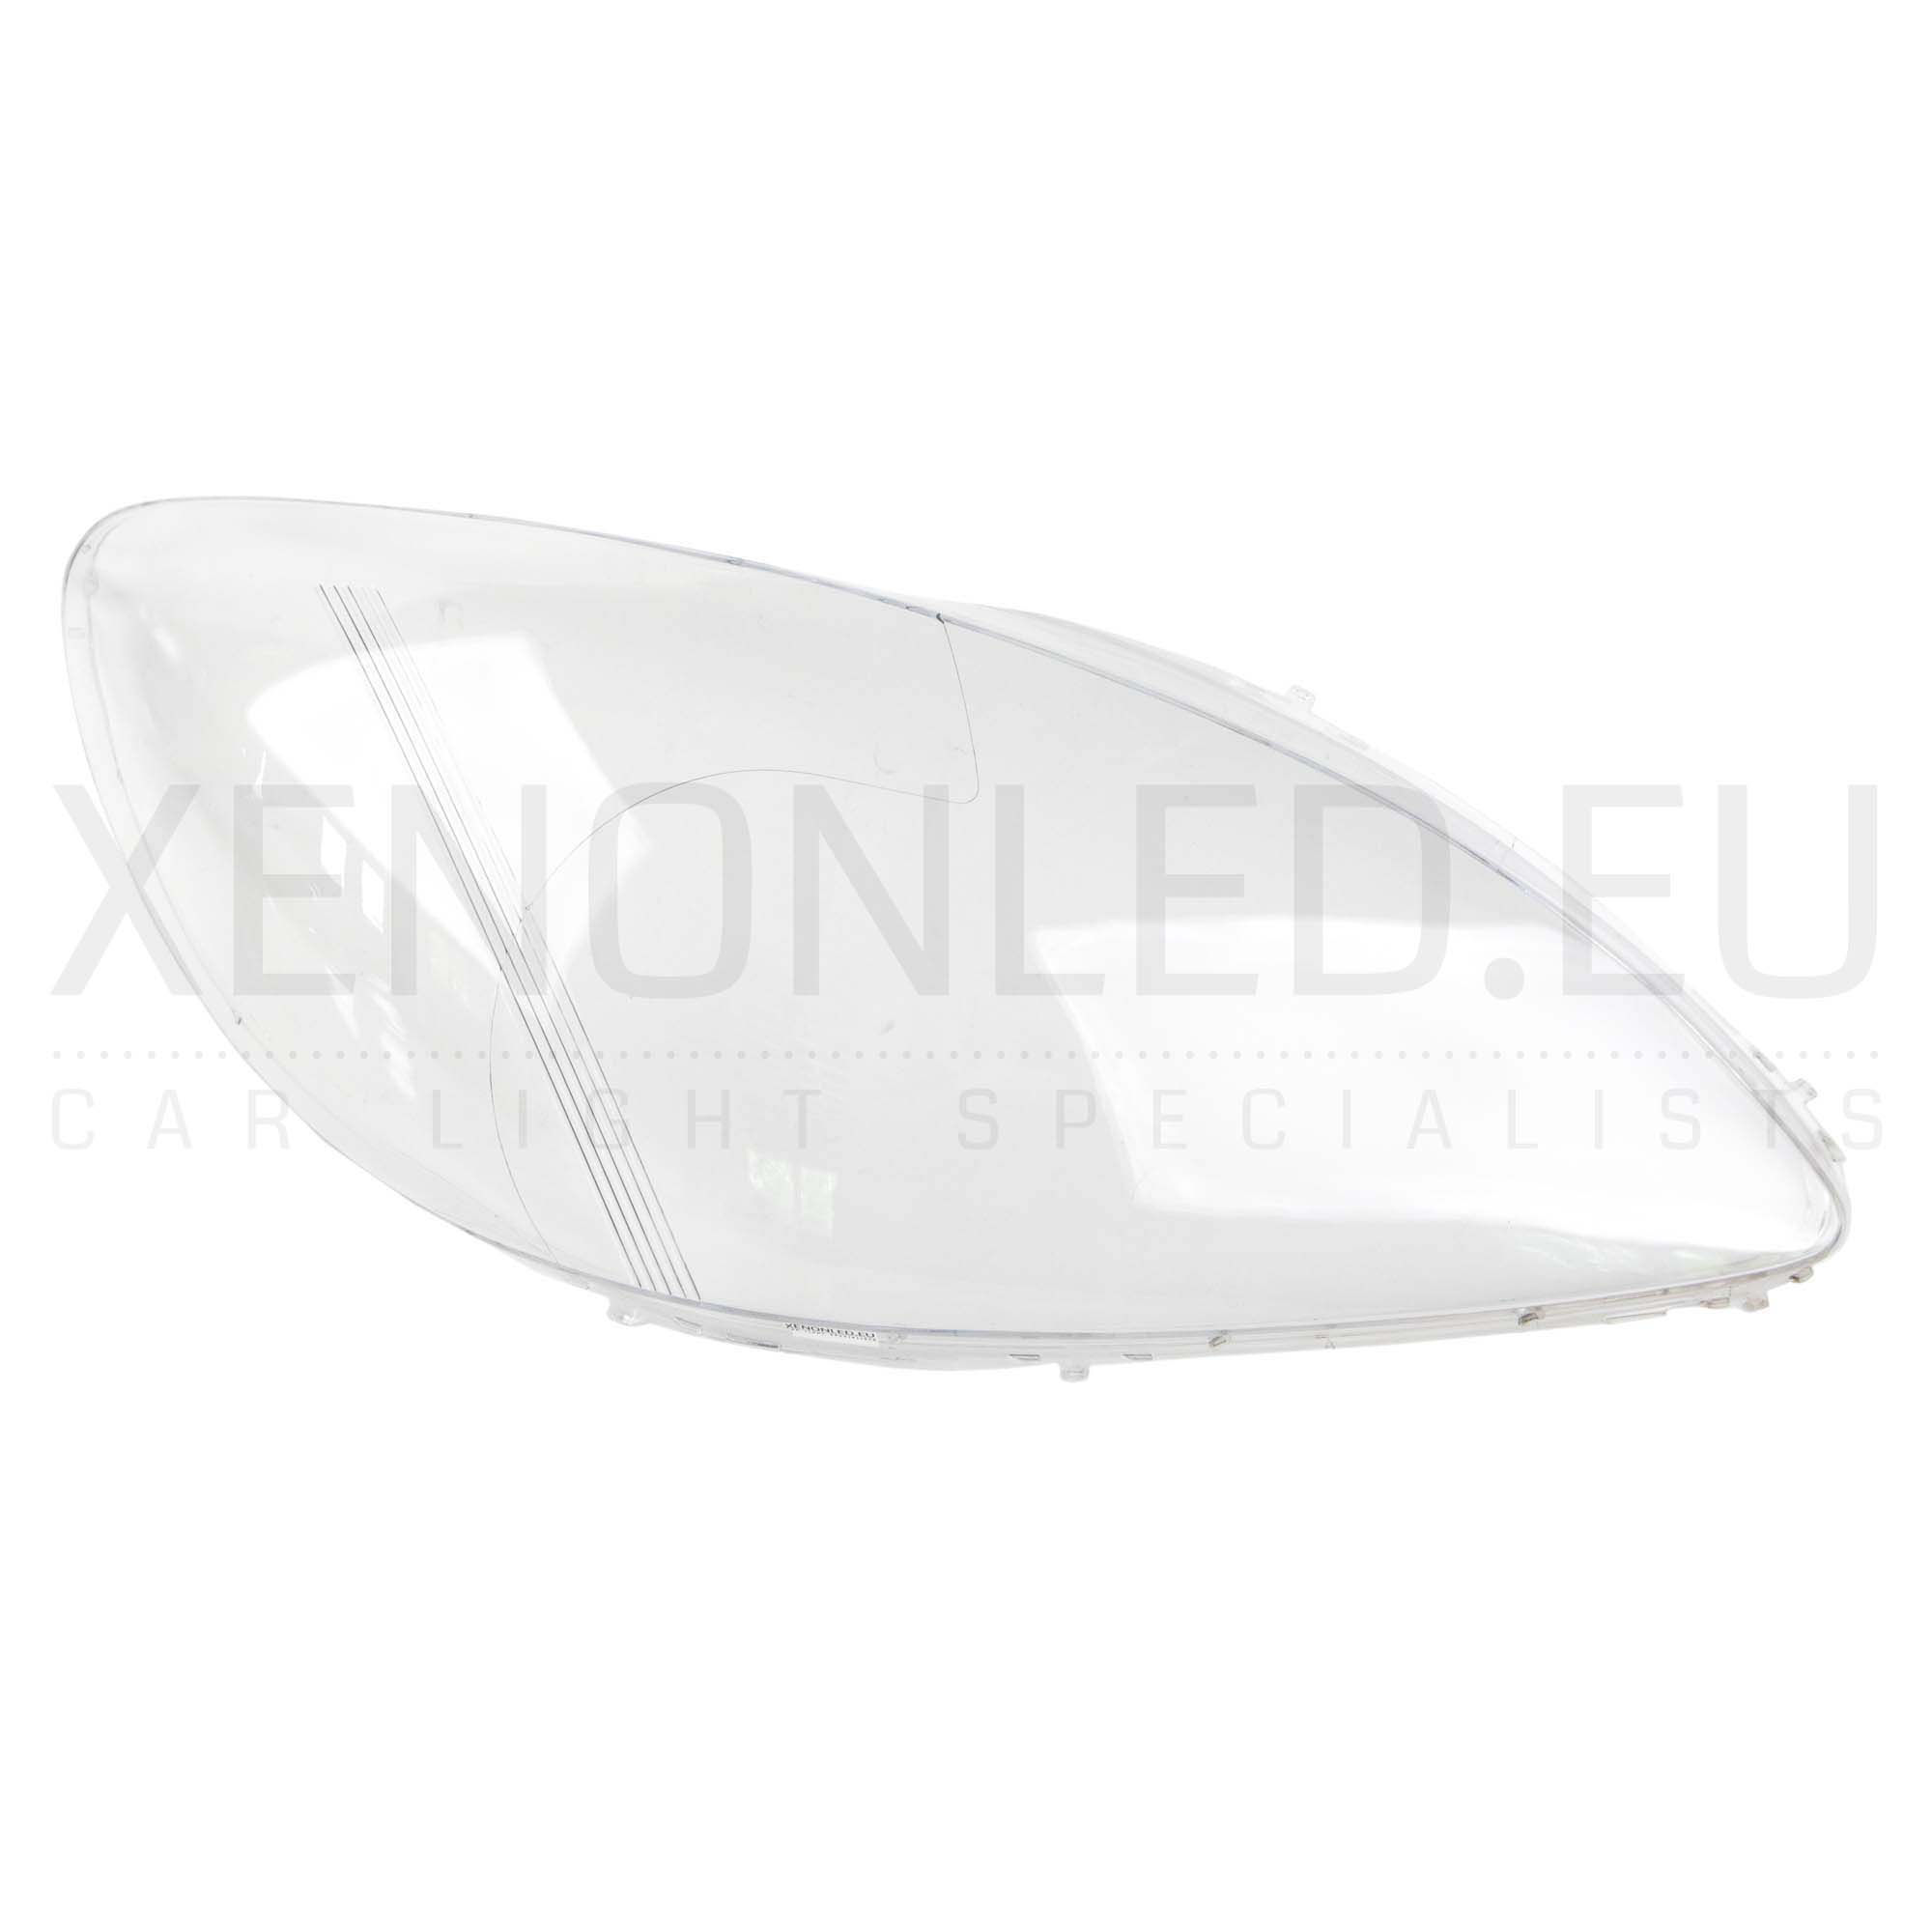 Mercedes - Benz Vito 2003 – 2010 Headlight Lens Cover Right Side ...